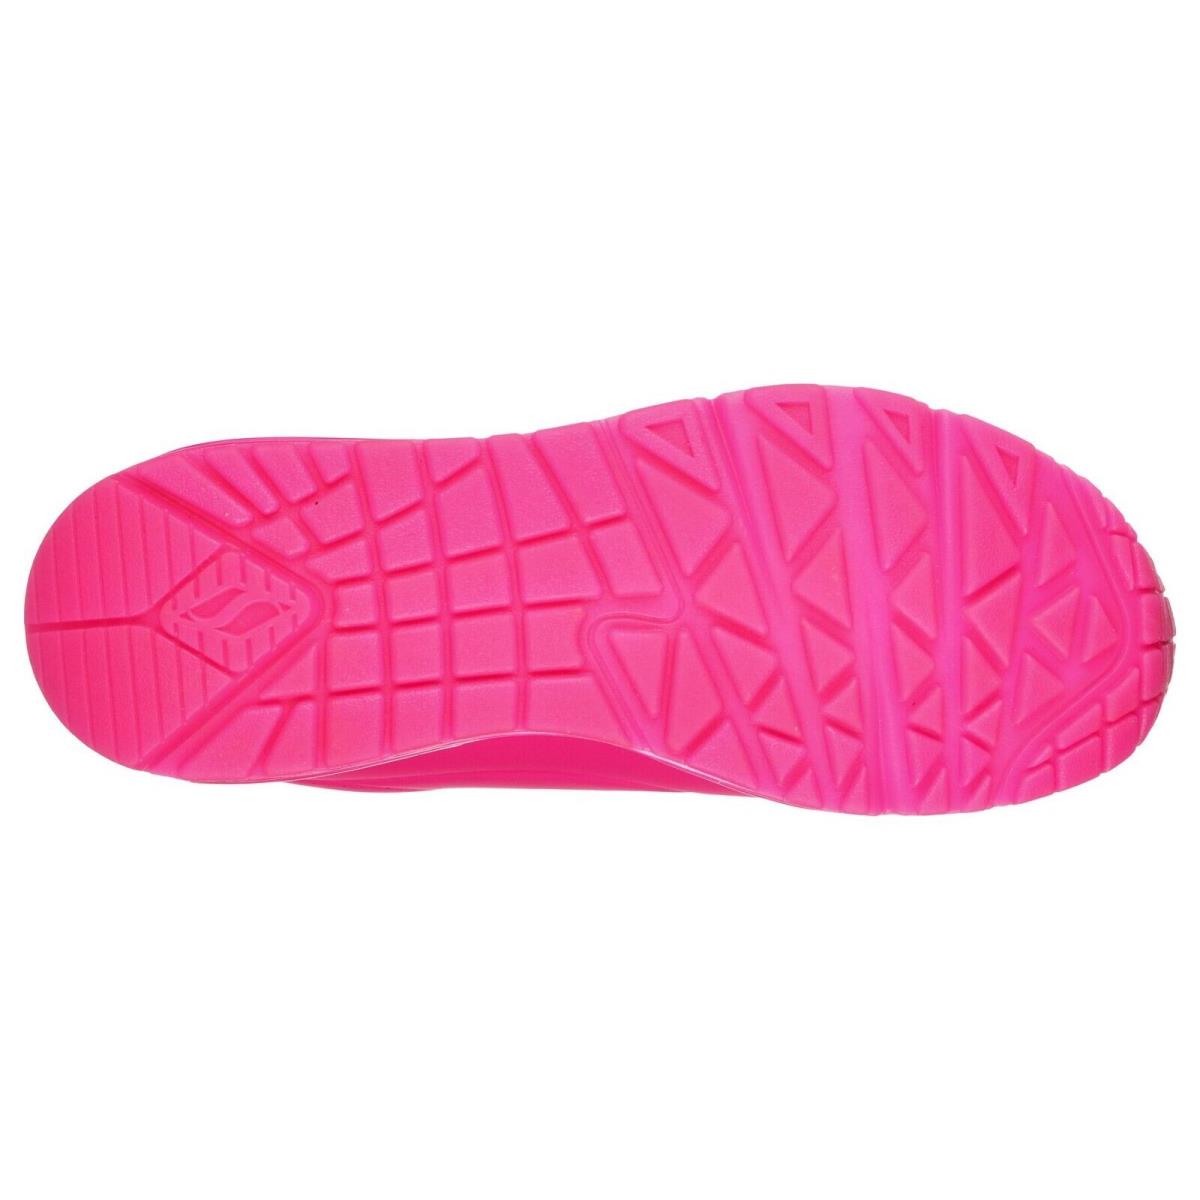 Skechers shoes Uno Night Shades - Hot Pink 2